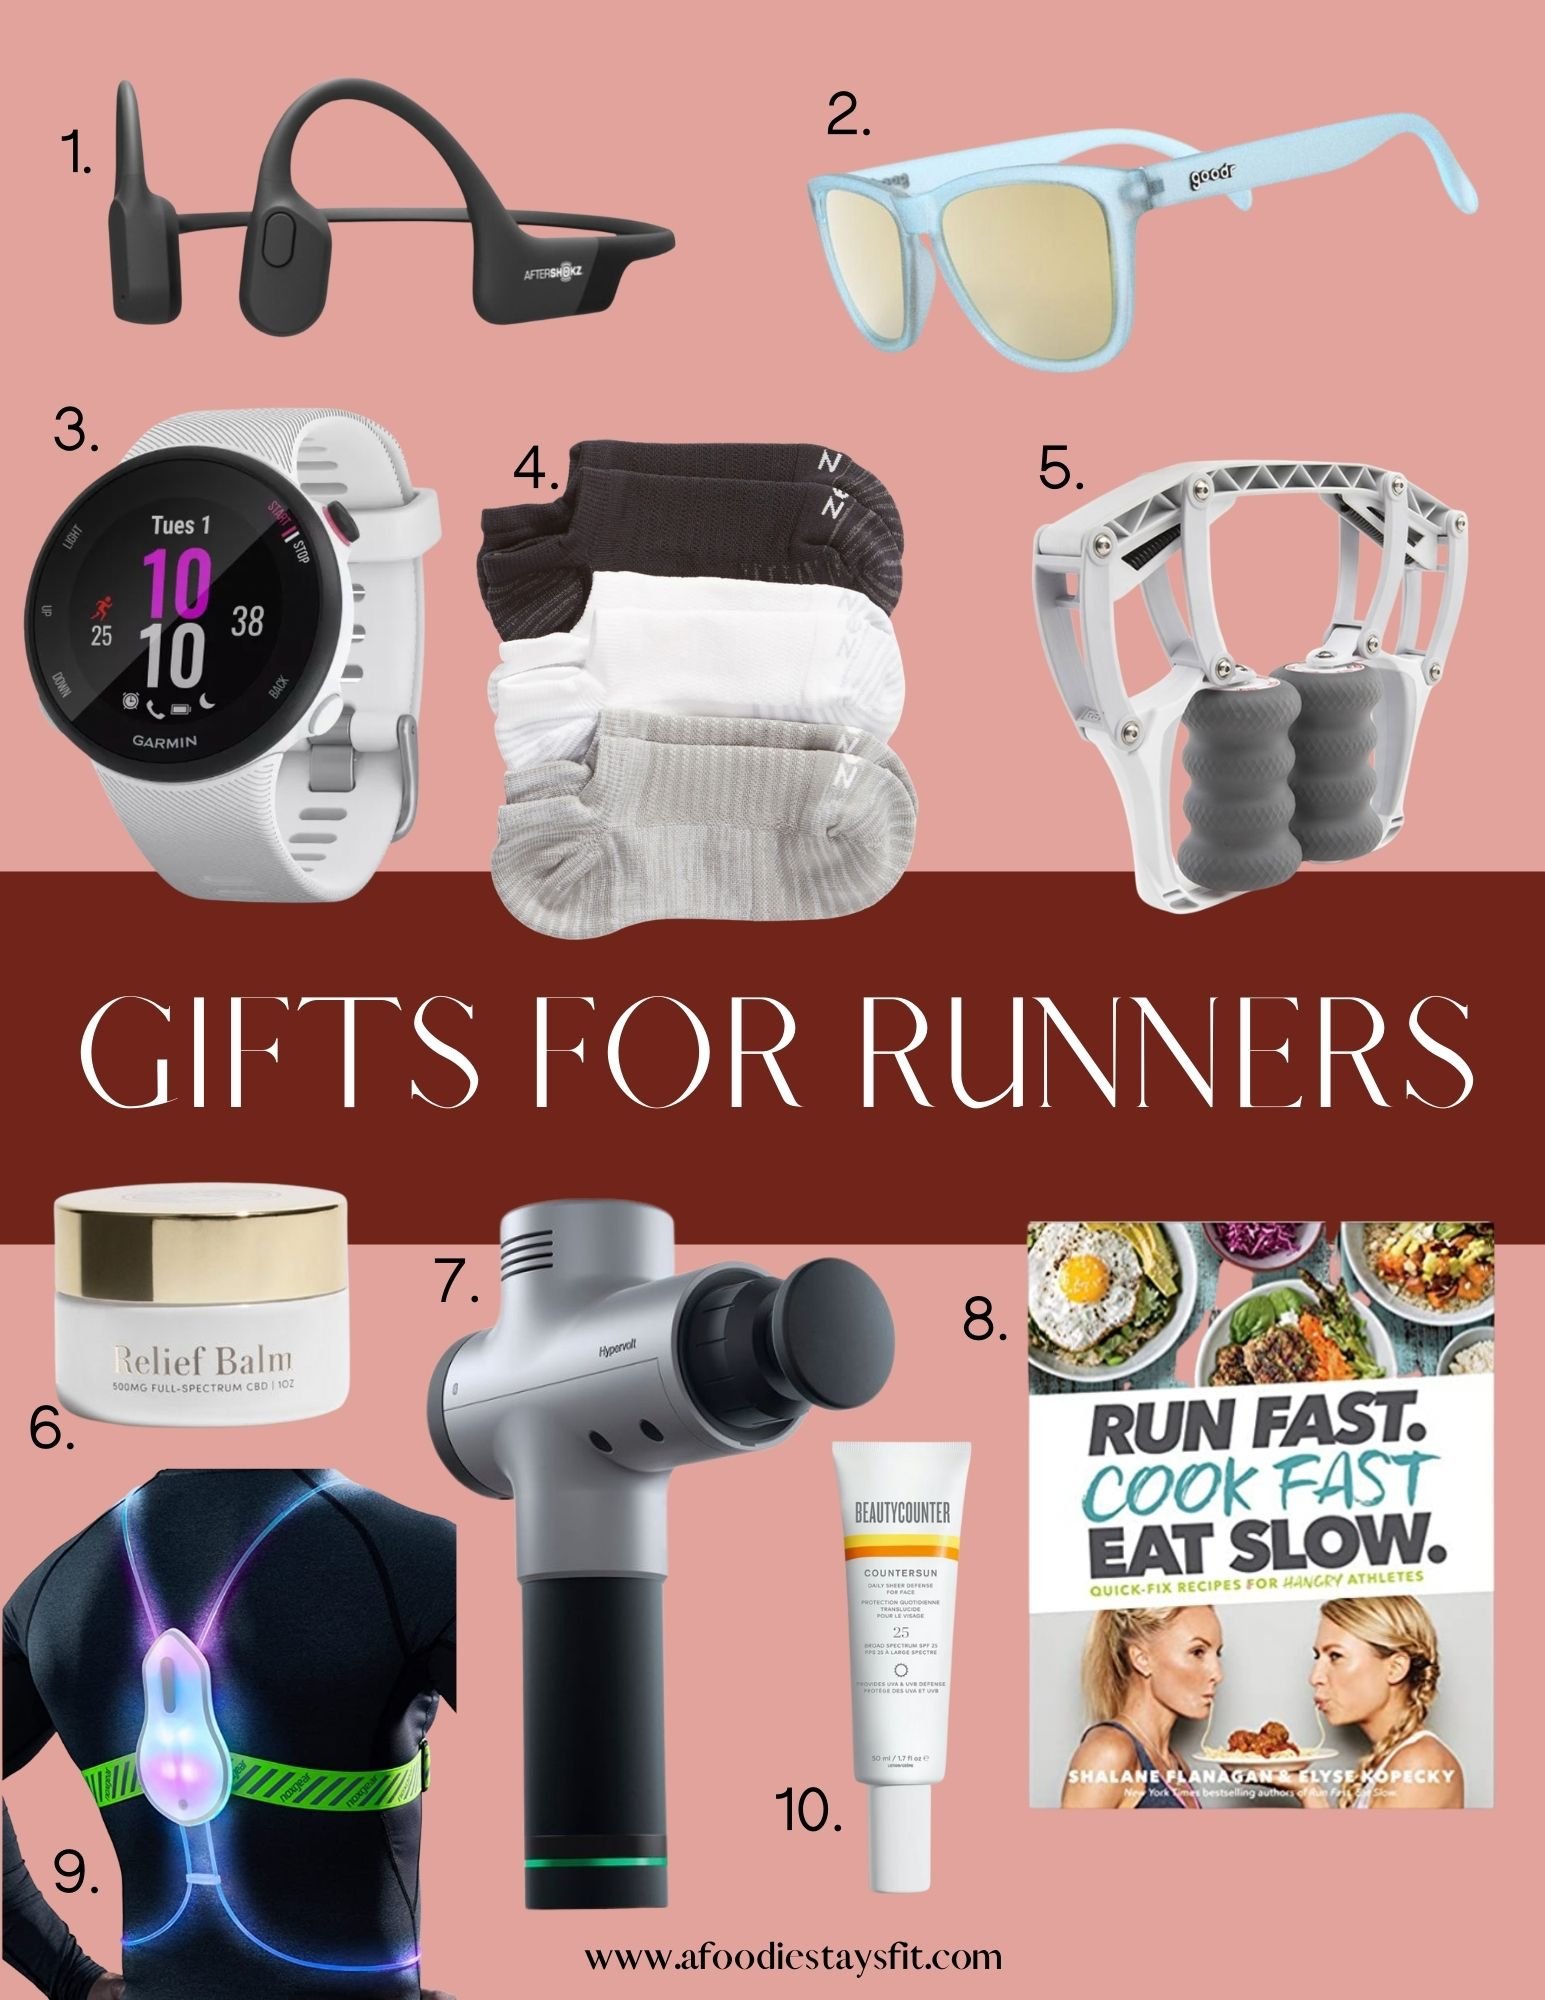 Gifts for Runners